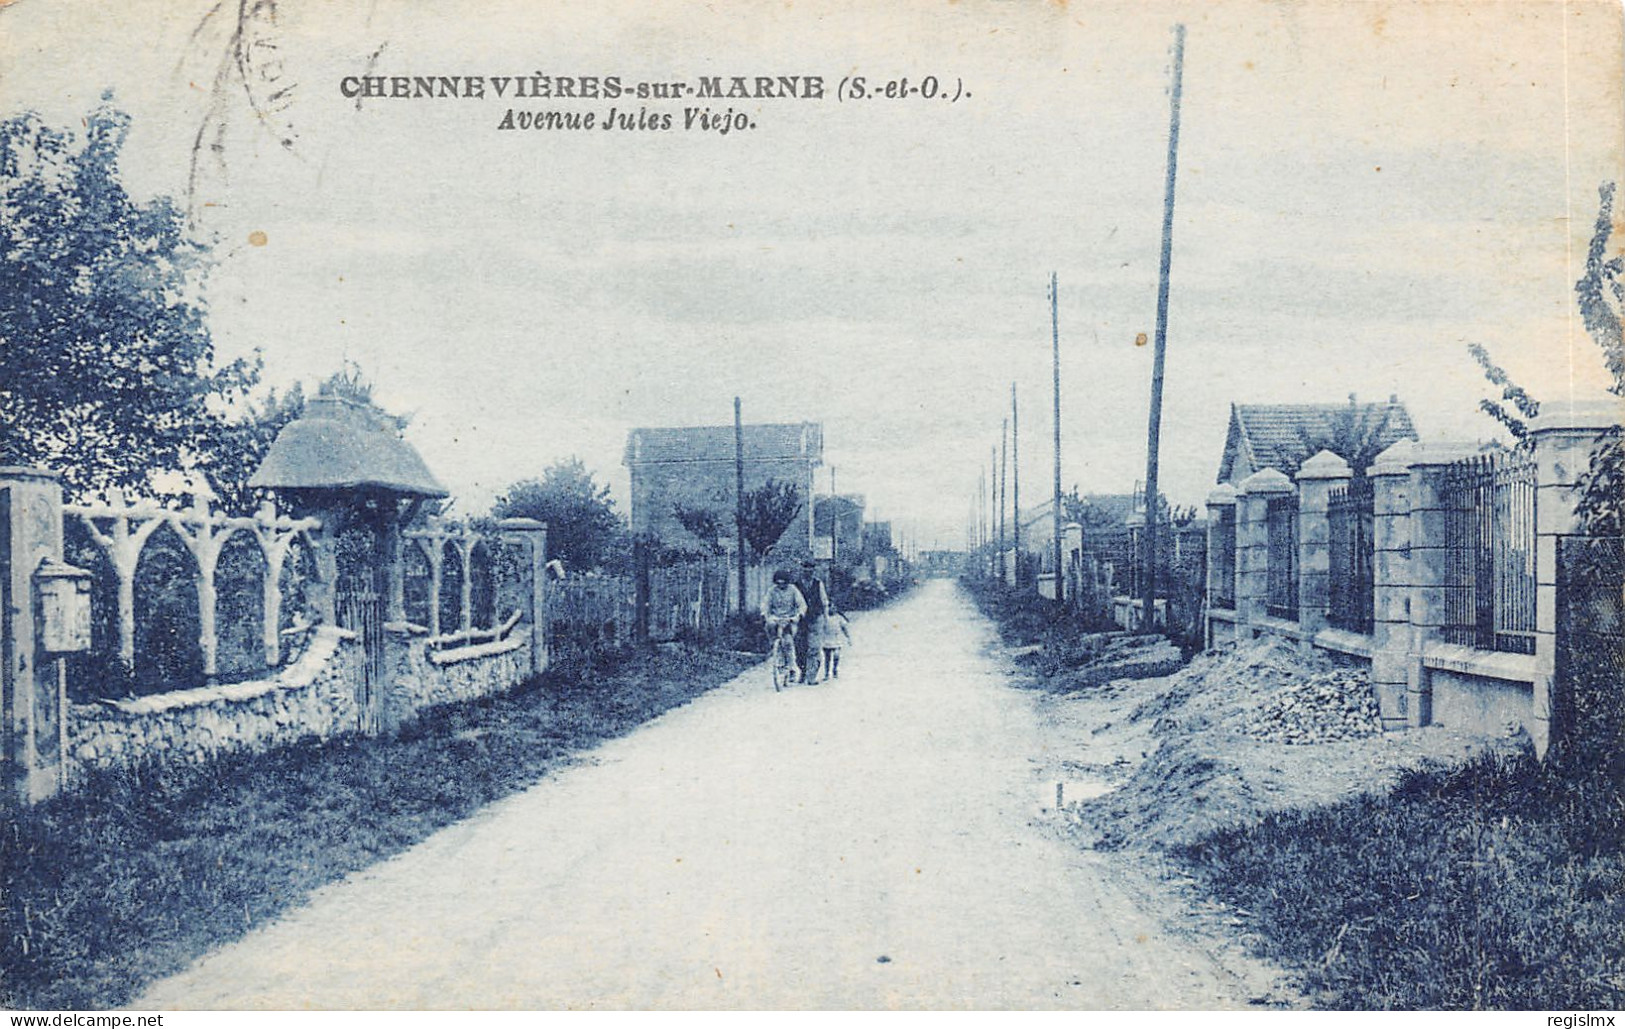 94-CHENNEVIERES SUR MARNE-N°585-F/0321 - Chennevieres Sur Marne